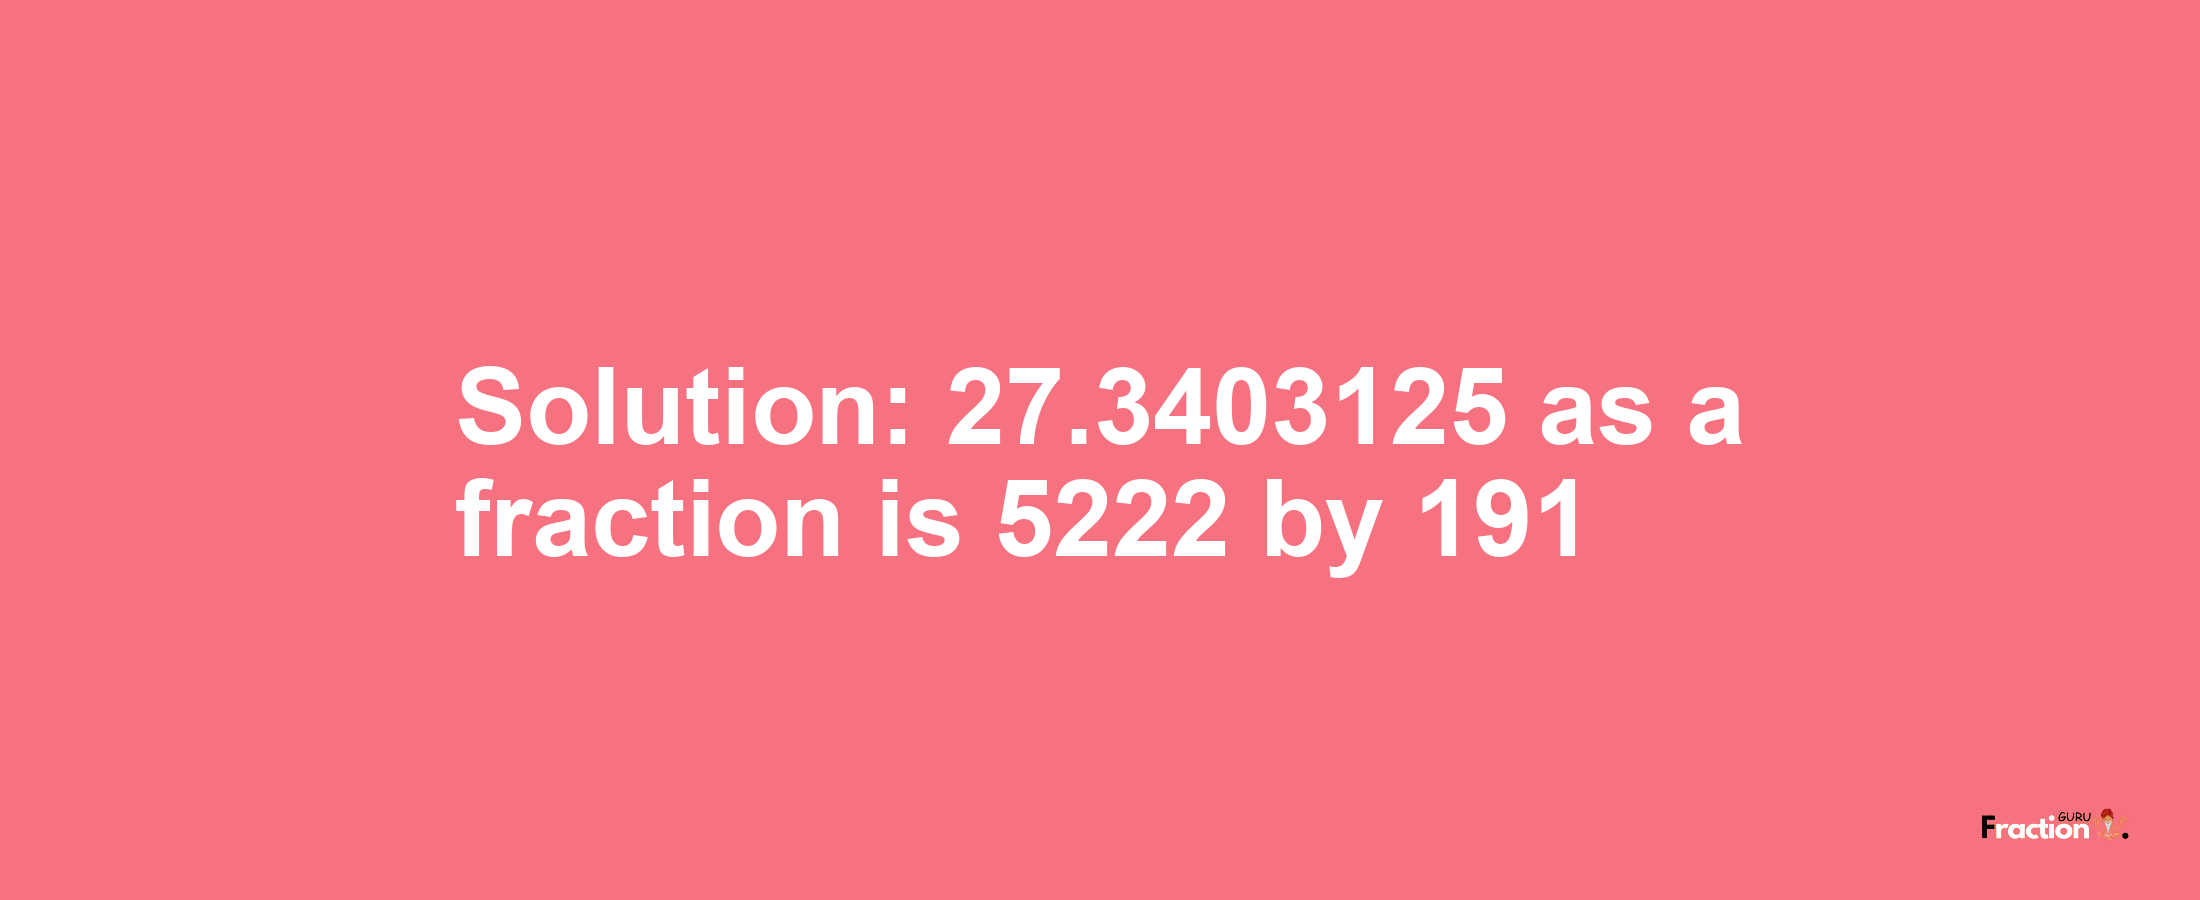 Solution:27.3403125 as a fraction is 5222/191